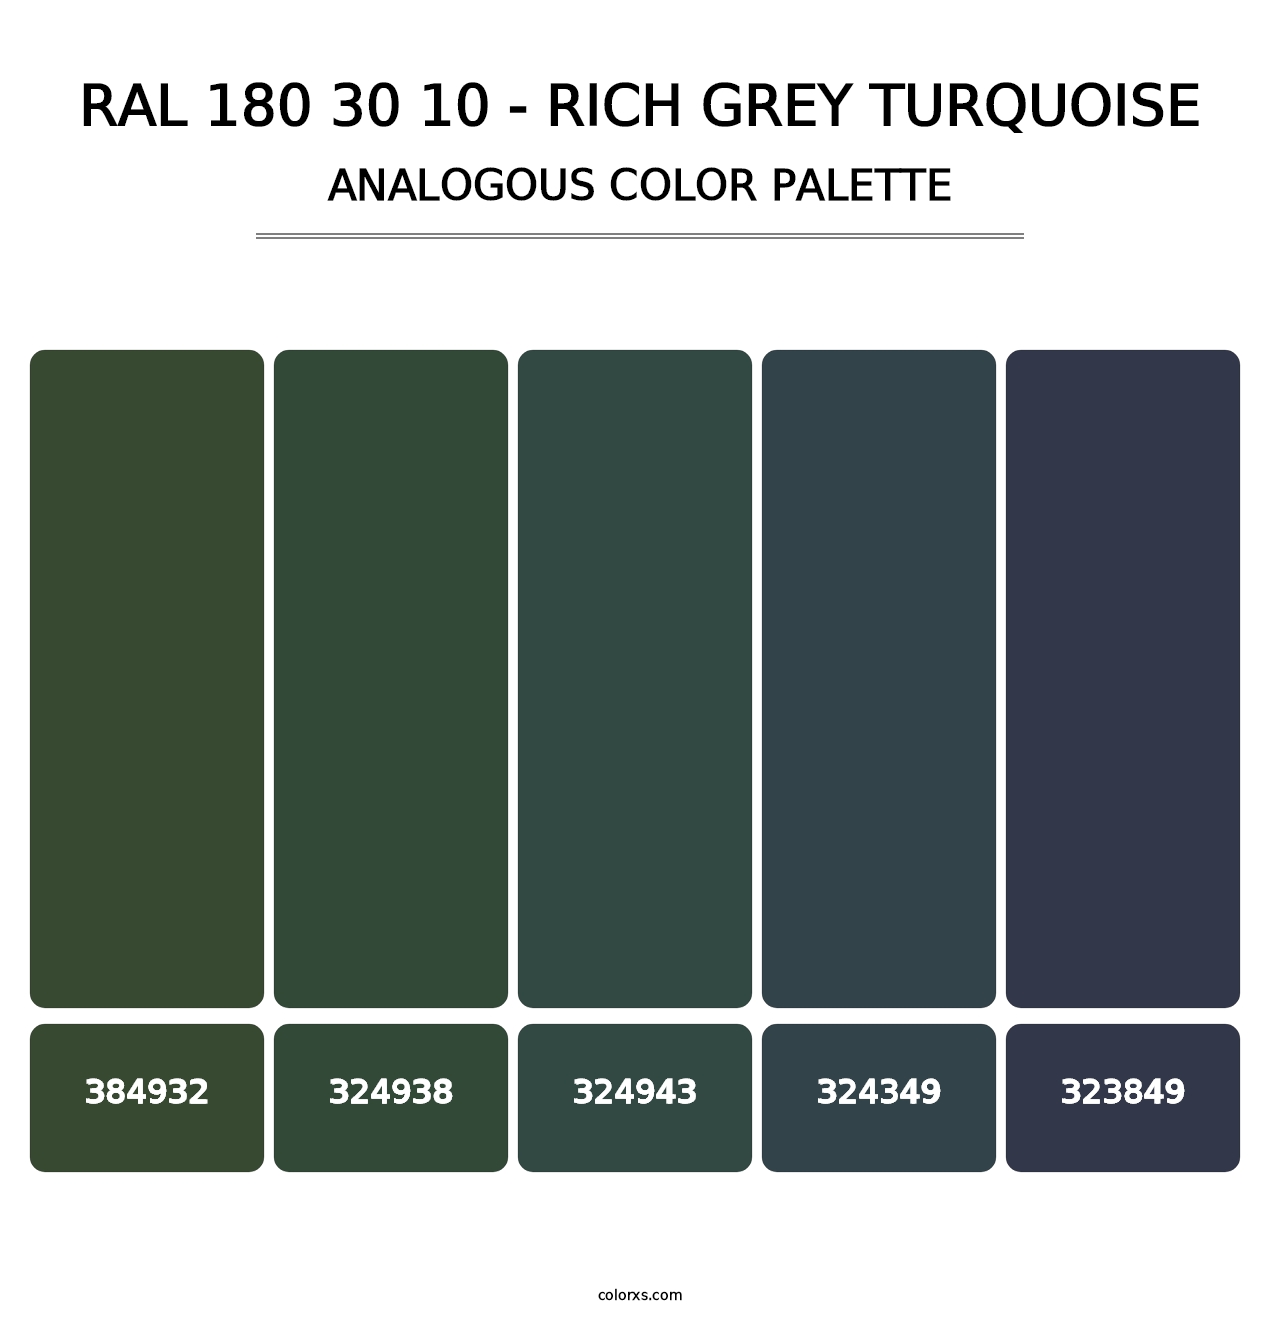 RAL 180 30 10 - Rich Grey Turquoise - Analogous Color Palette